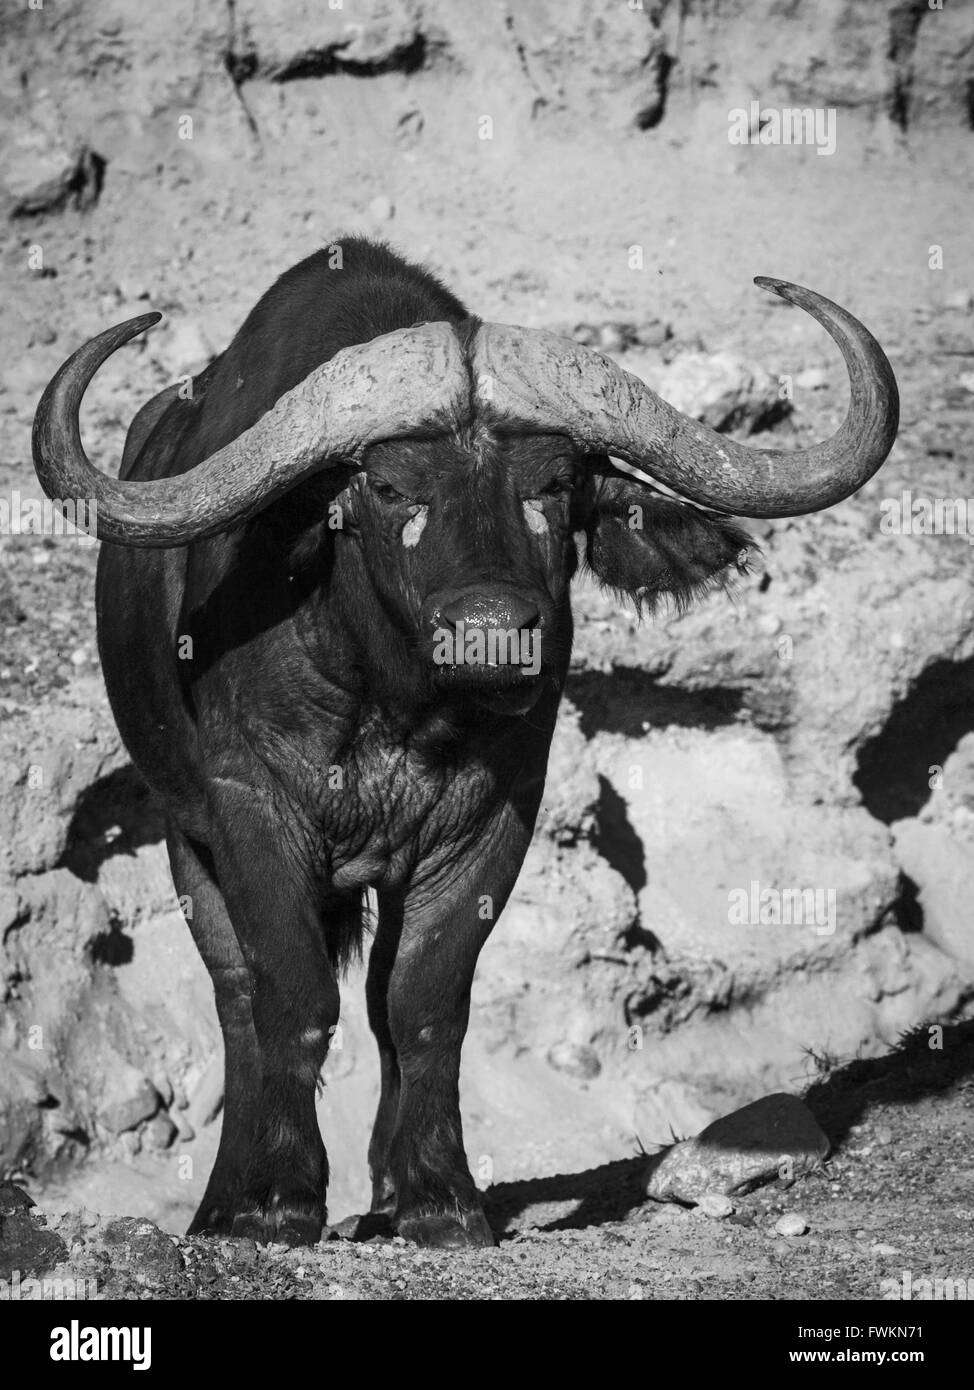 Black and white image of large African Buffalo (Syncerus caffer) with huge horns standing in Ngorongoro Crater, Tanzania, Africa Stock Photo